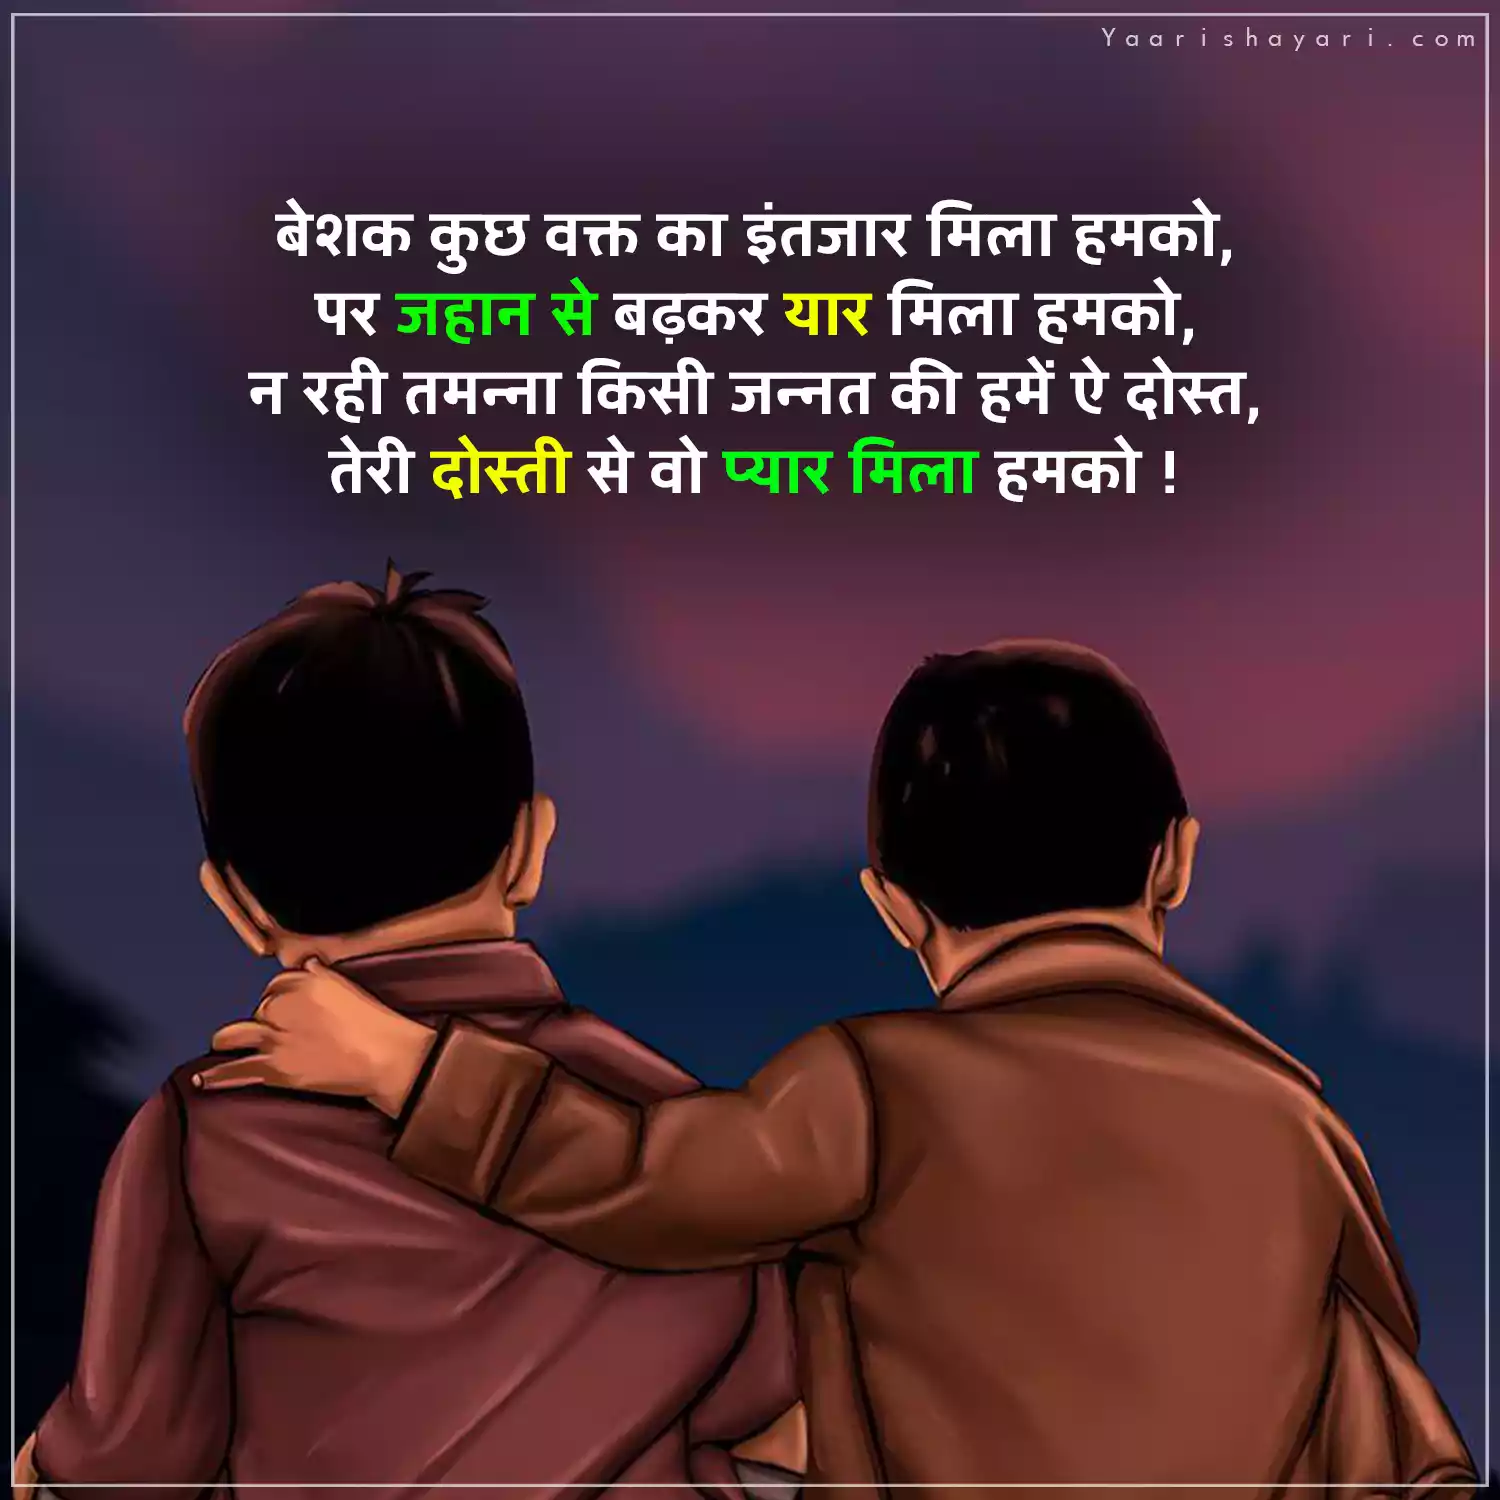 Best Friendship Quotes in Hindi